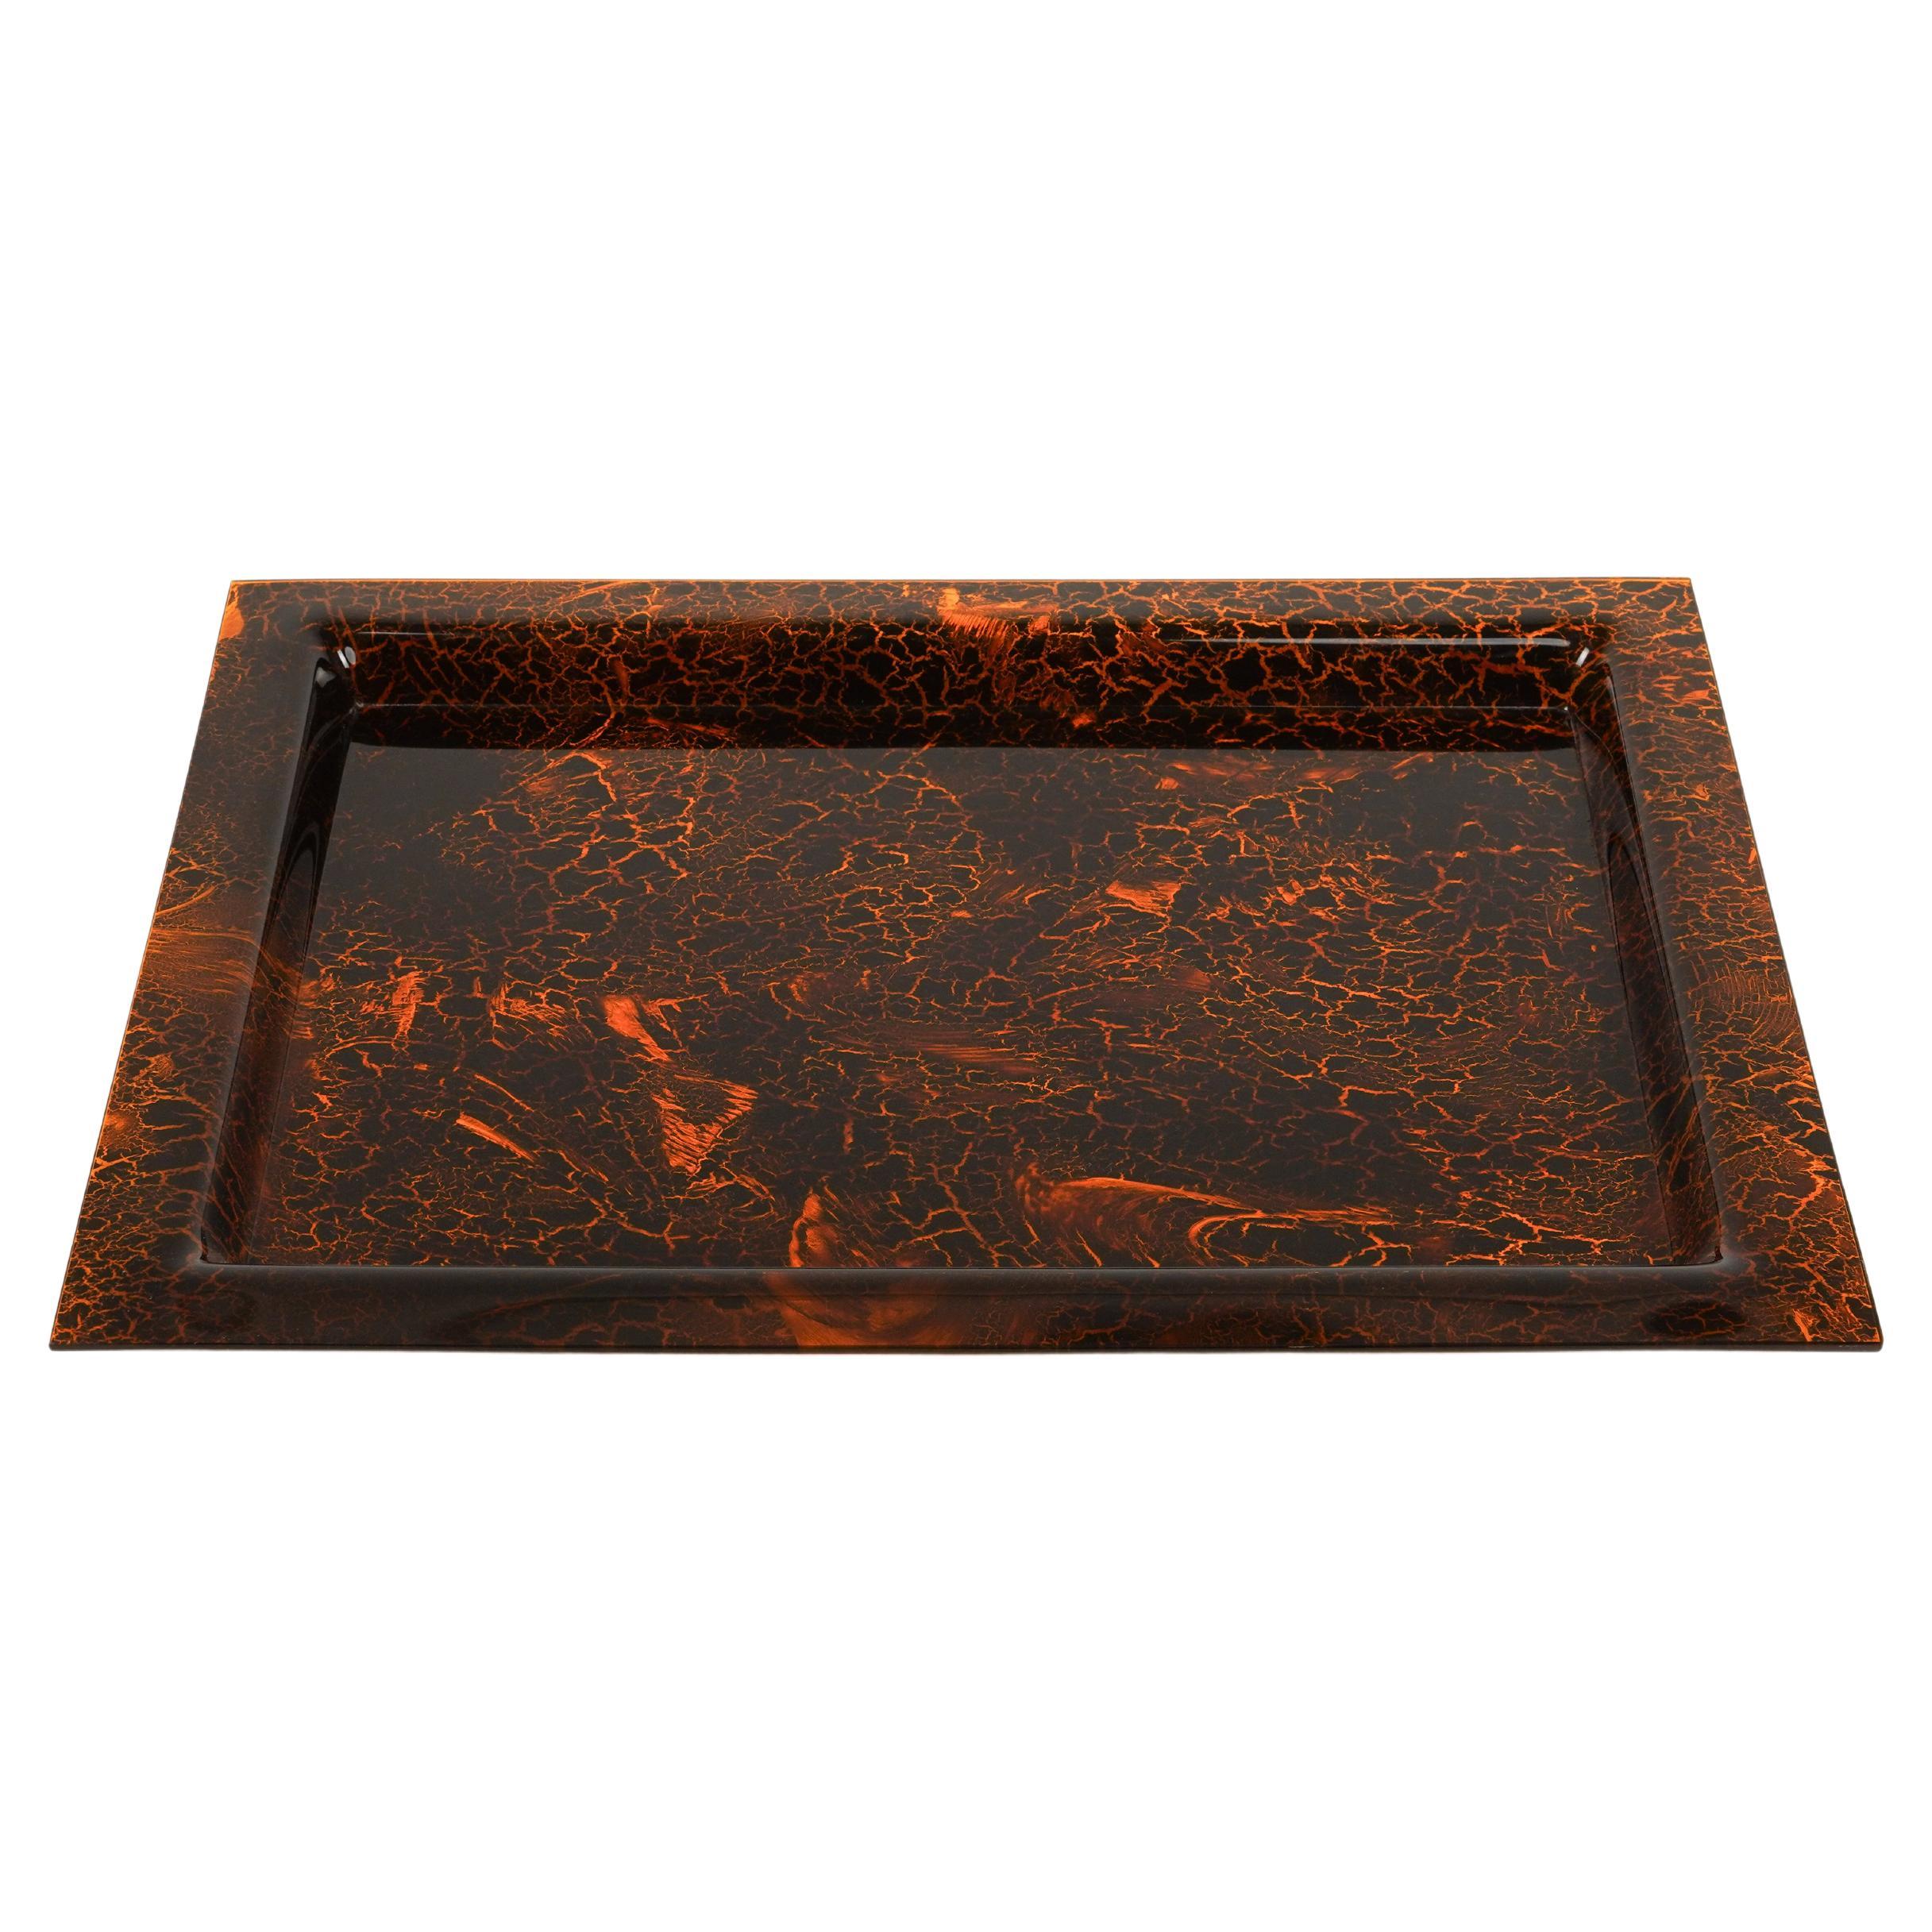 Serving Tray in Effect Tortoiseshell Lucite Christian Dior Style, Italy 1970s For Sale